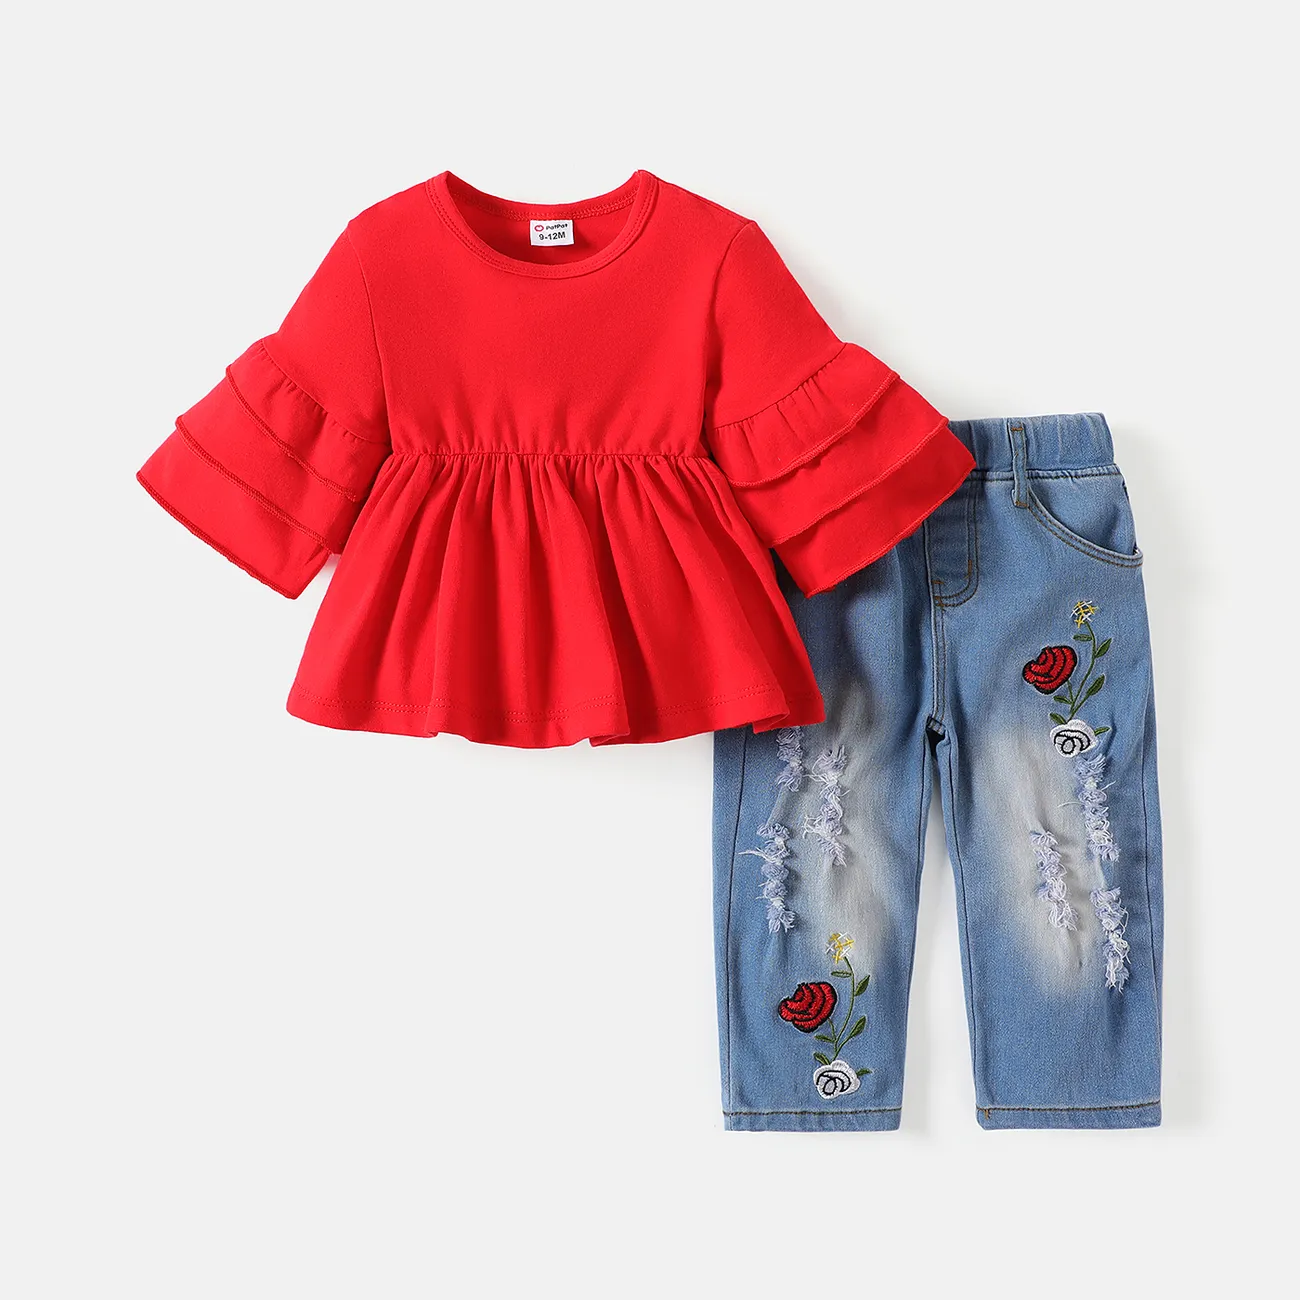 2pcs Baby Girl Cotton Layered Ruffle Trim Flare-sleeve Top and Rose Floral Embroidered Ripped Jeans Set Red big image 1